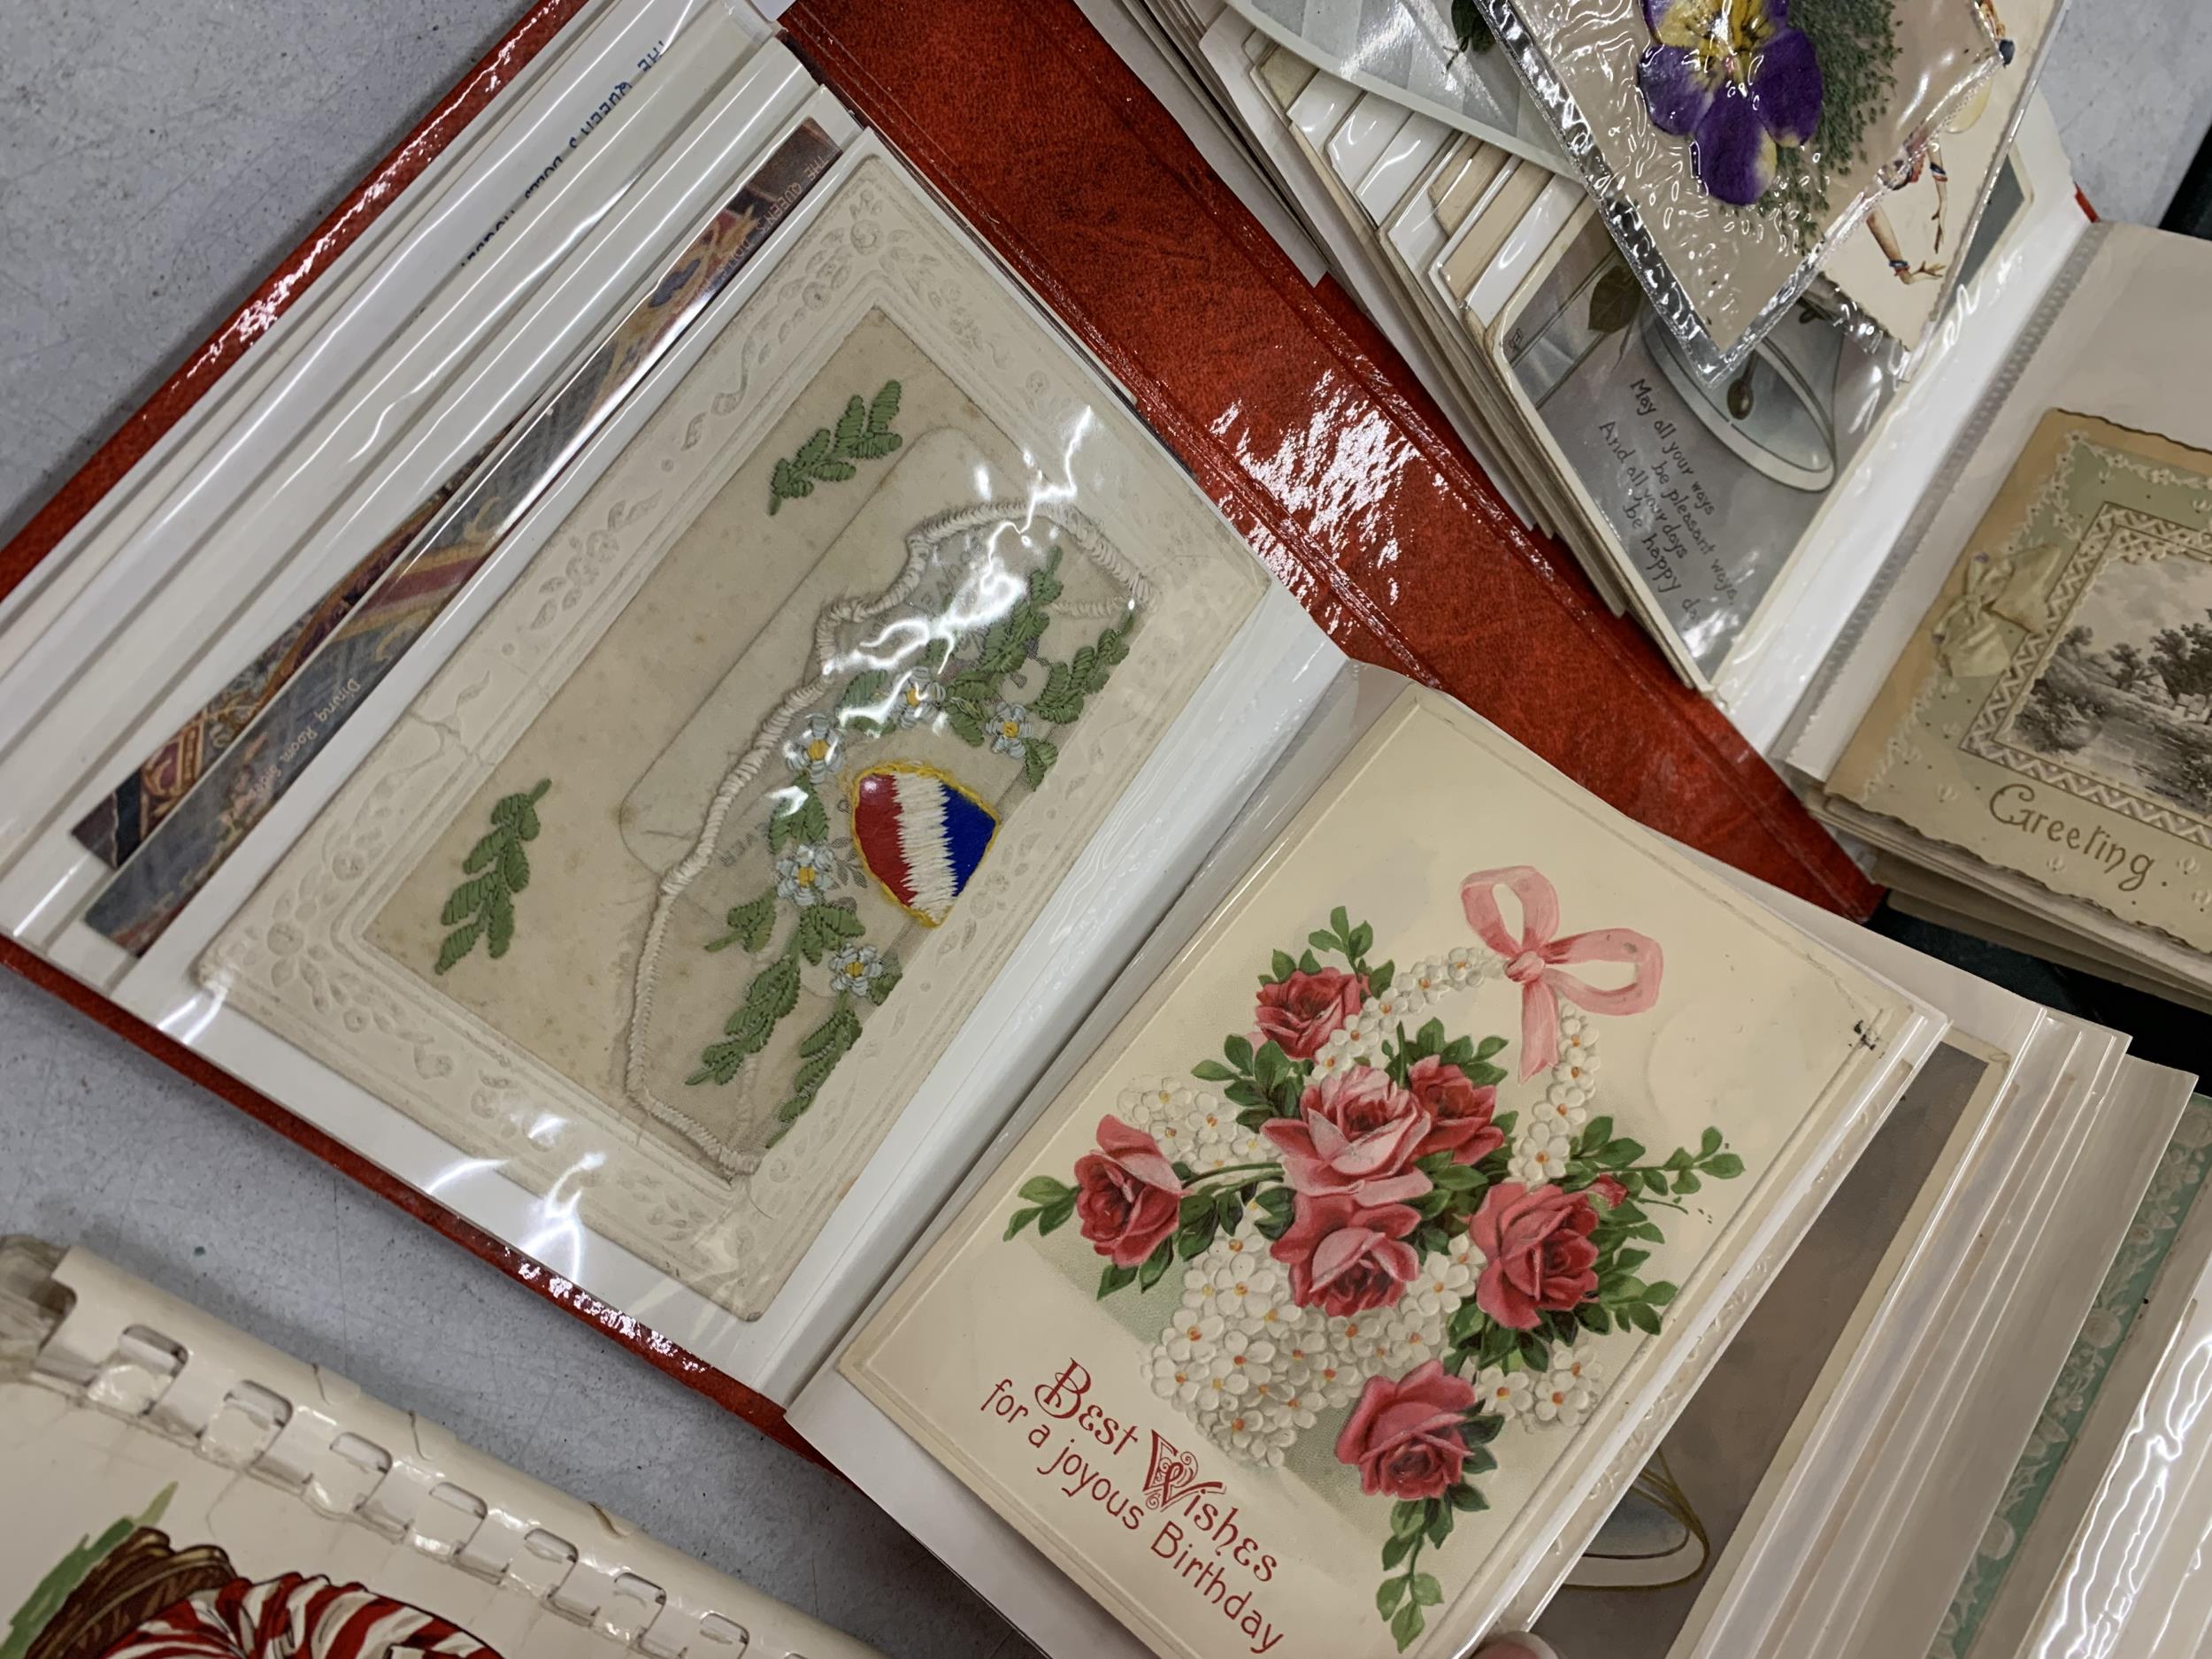 A PHOTO ALBUM CONTAINING VINTAGE POSTCARDS AND GREETINS CARDS, SOME HAND EMBROIDERED - Image 6 of 7